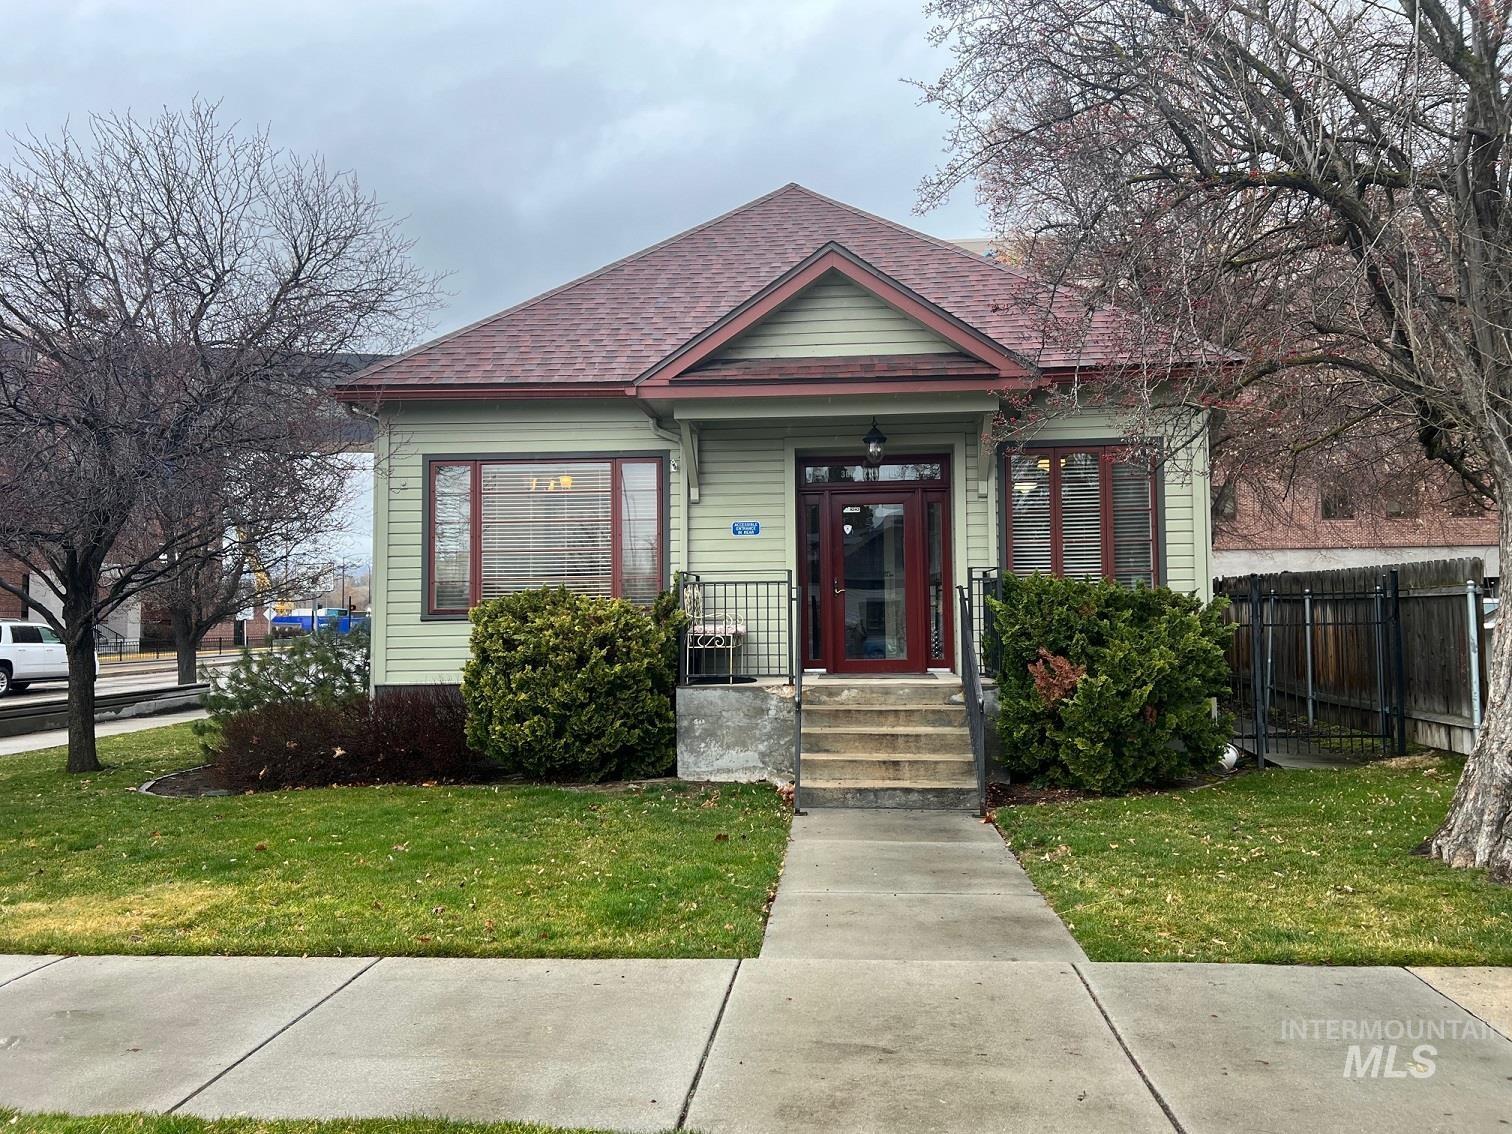 300 East Bannock, Boise, Idaho 83712-6207, Business/Commercial For Sale, Price $2,160,000,MLS 98903722